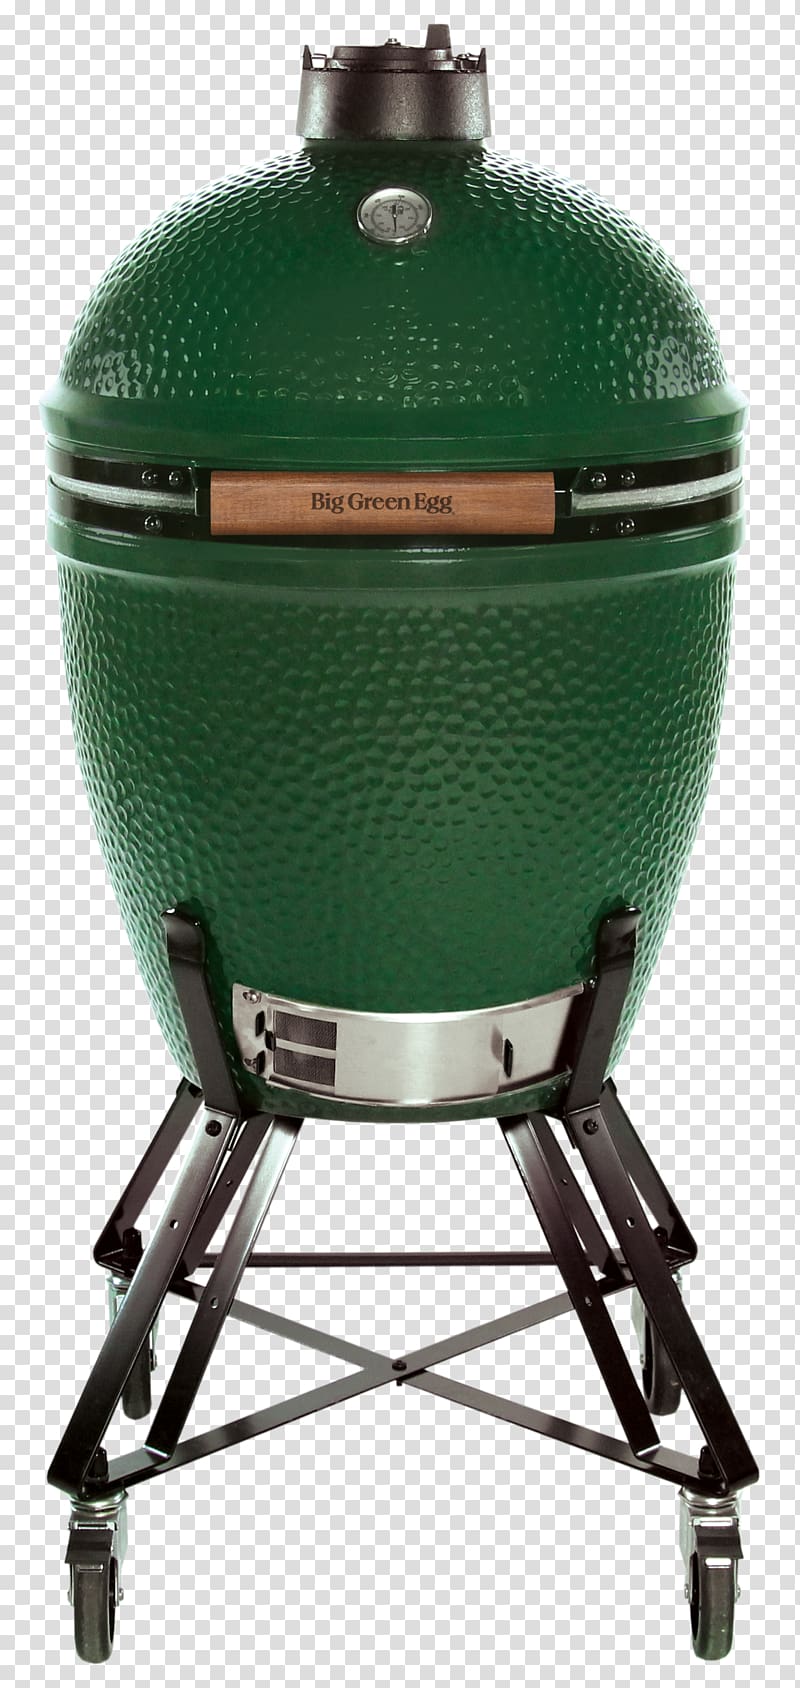 Barbecue Kamado Big Green Egg Large Grilling, barbecue transparent background PNG clipart